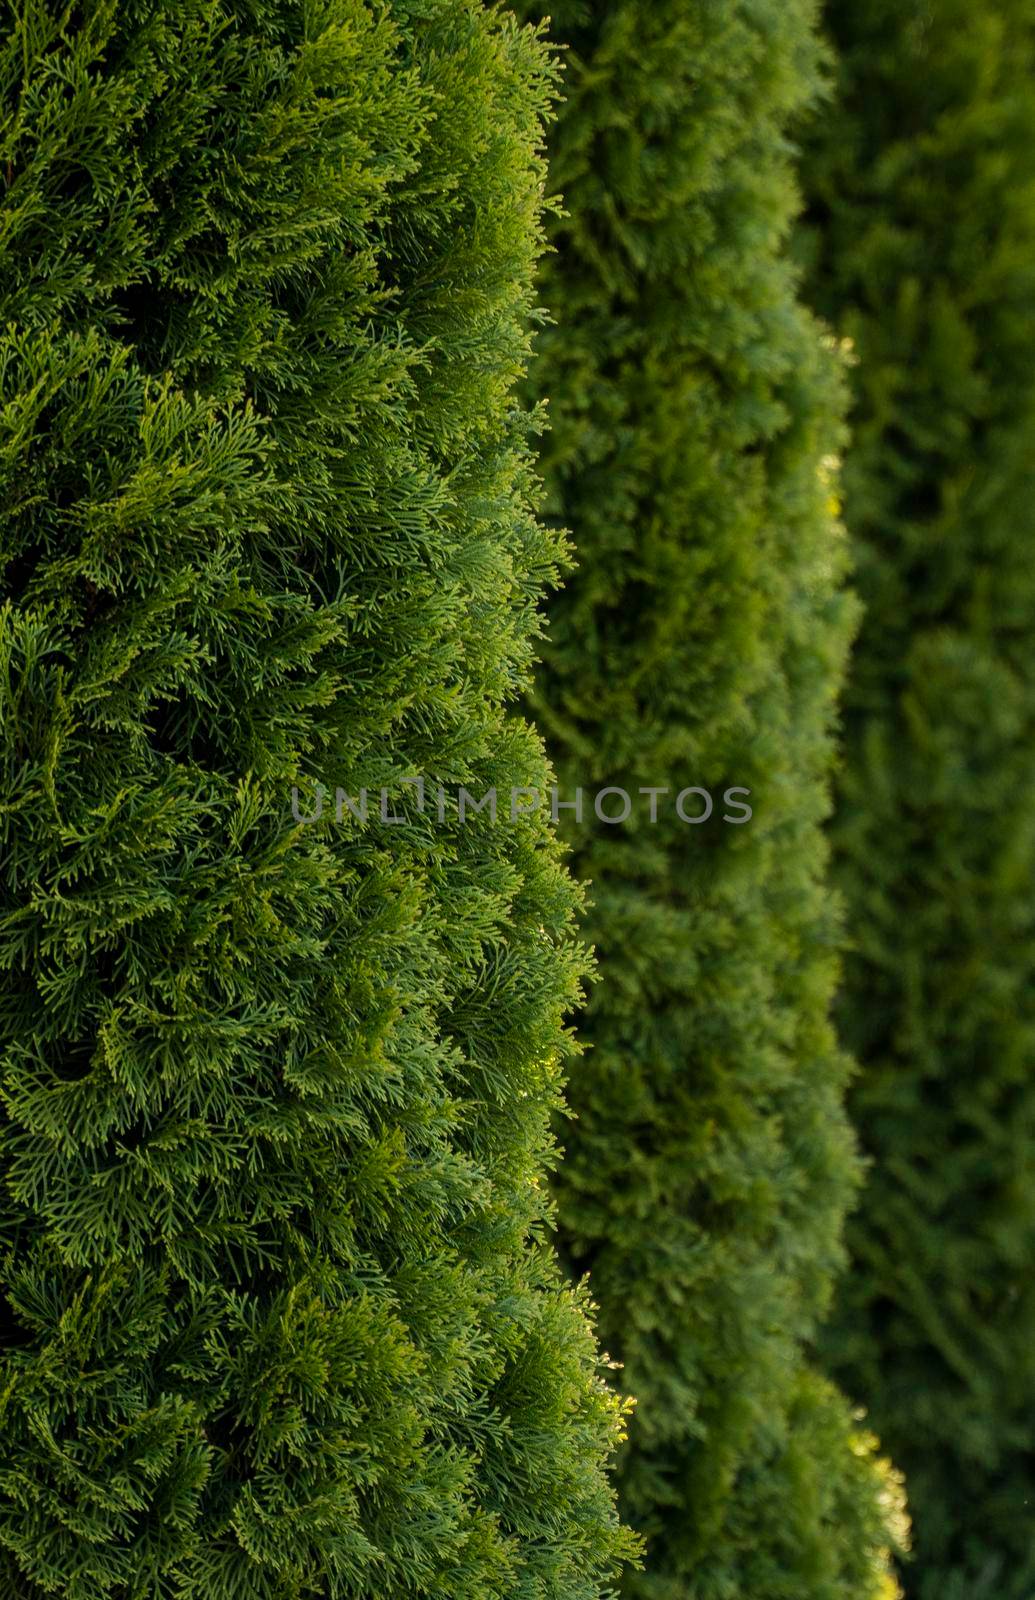 Green hedge of thuja trees. Closeup fresh green branches of thuja trees. Evergreen coniferous Tui tree. Nature, background